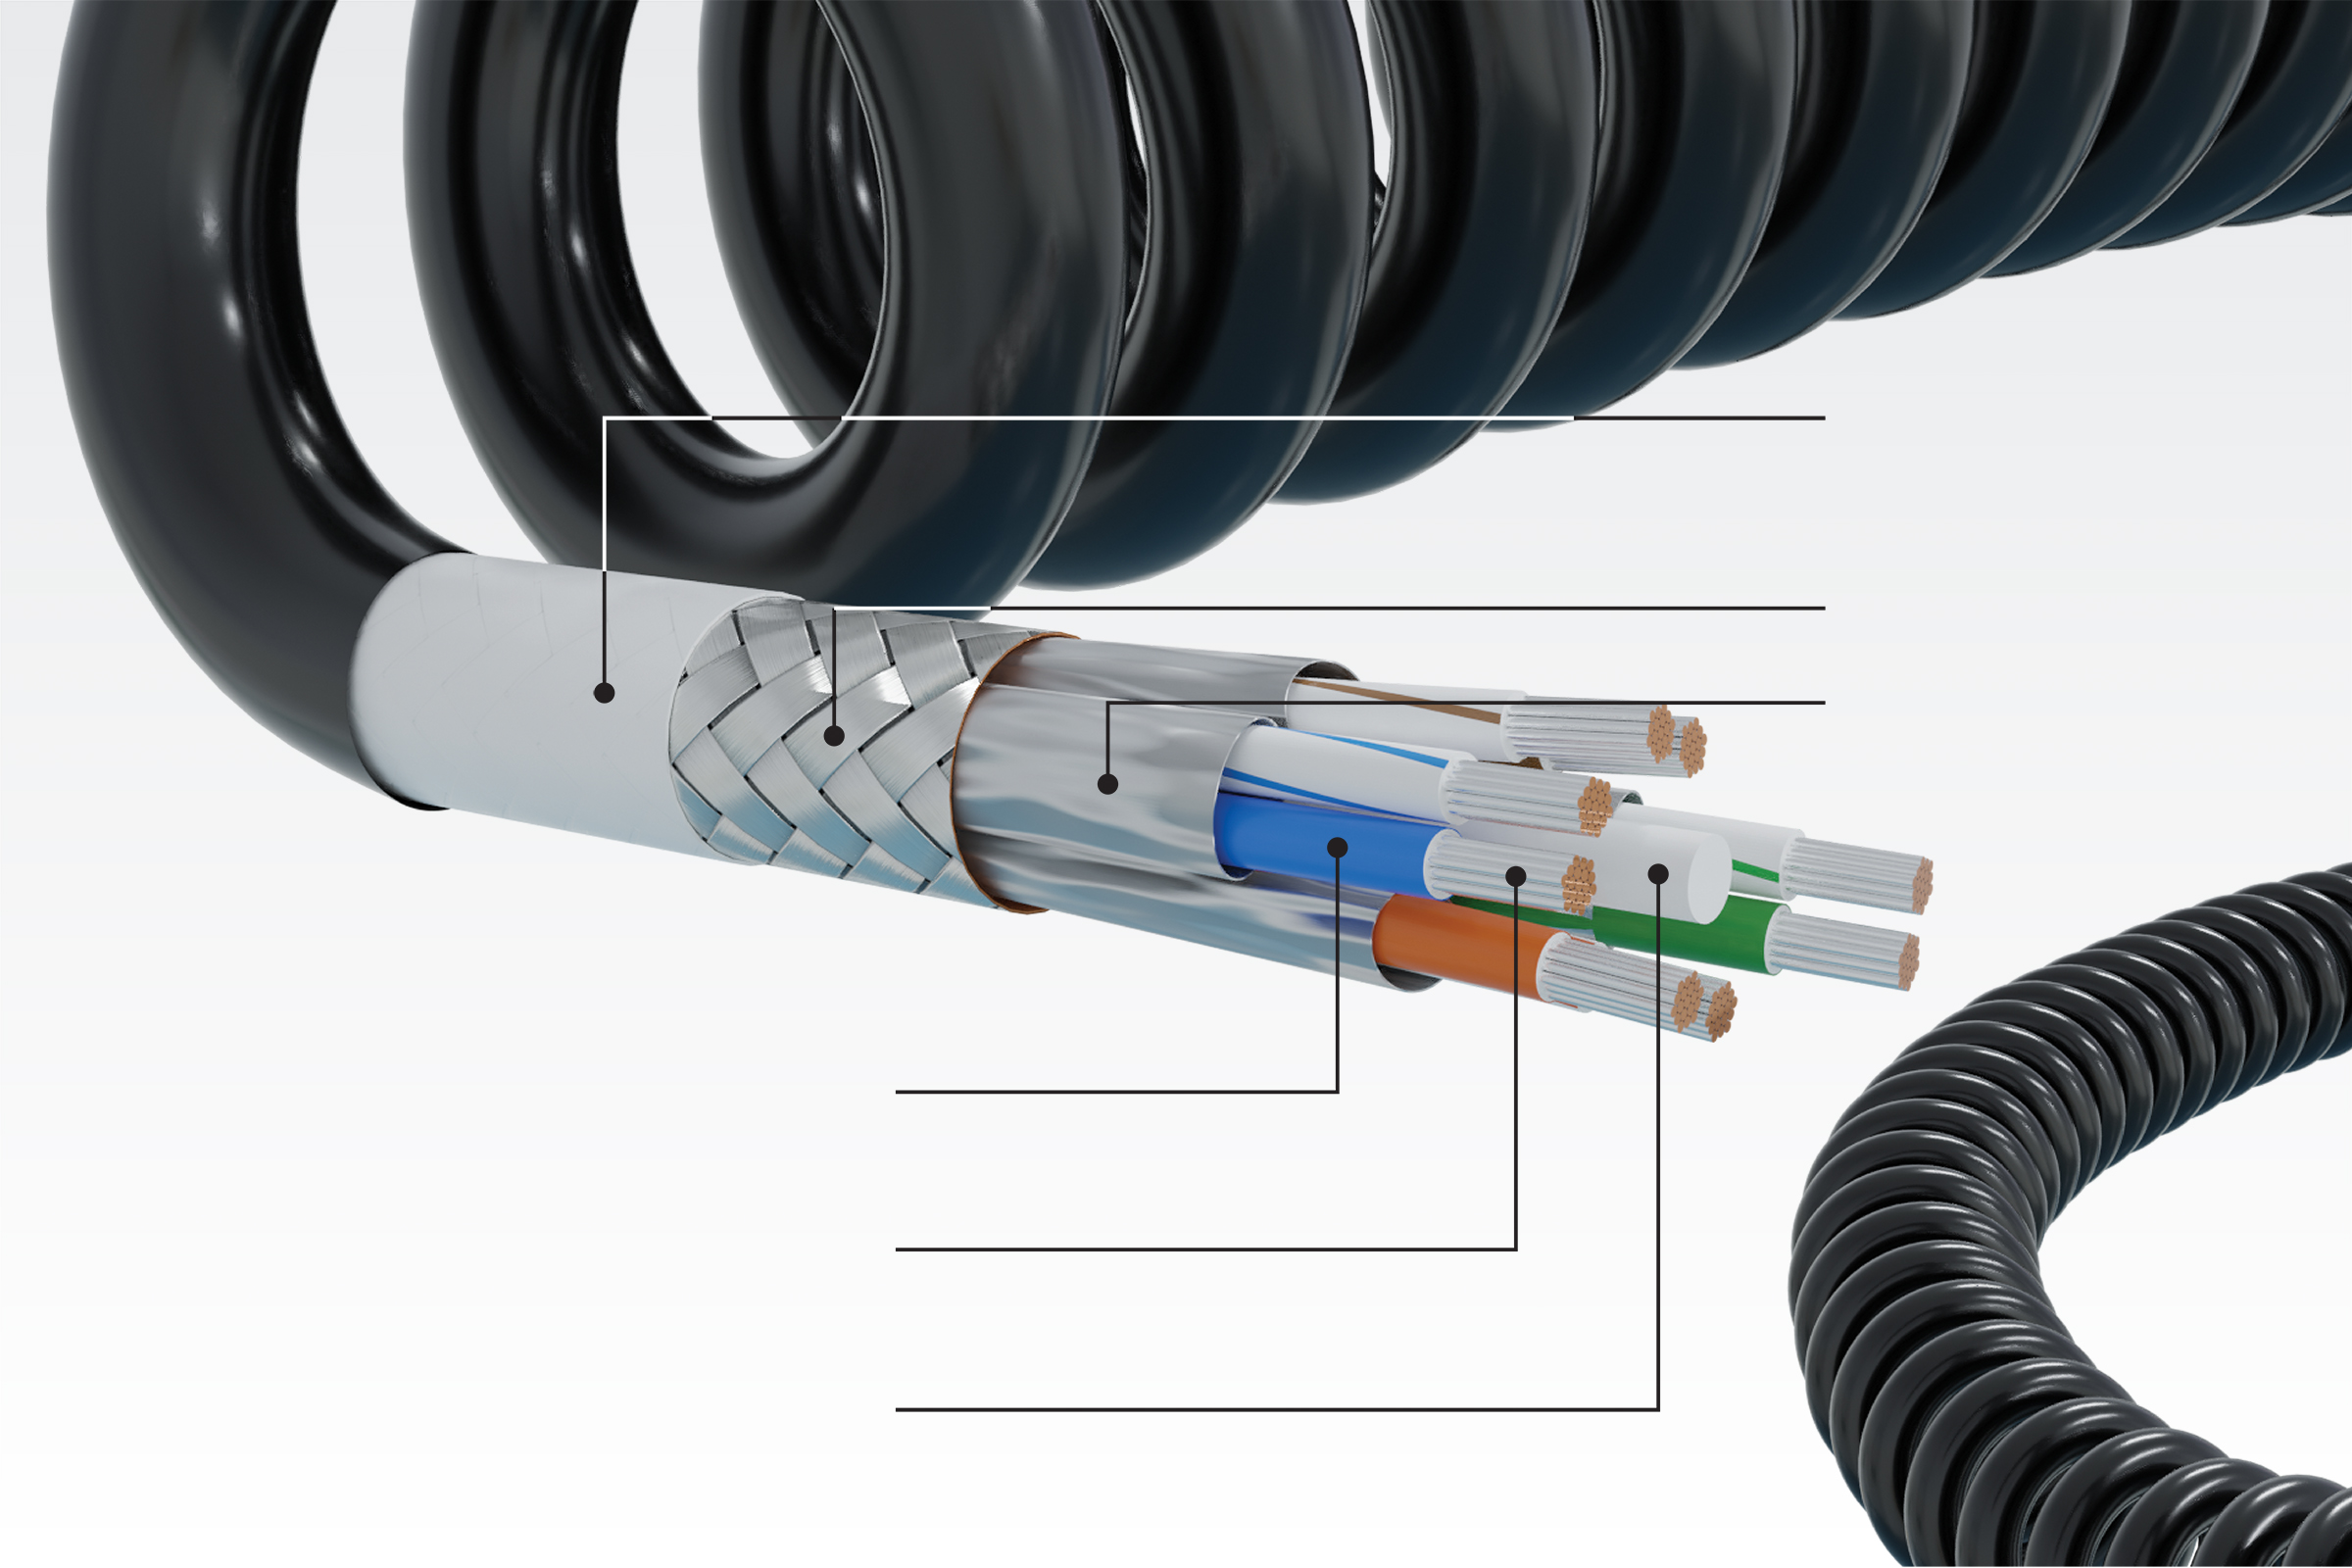 Custom Coiled Cables for Defense Land Systems